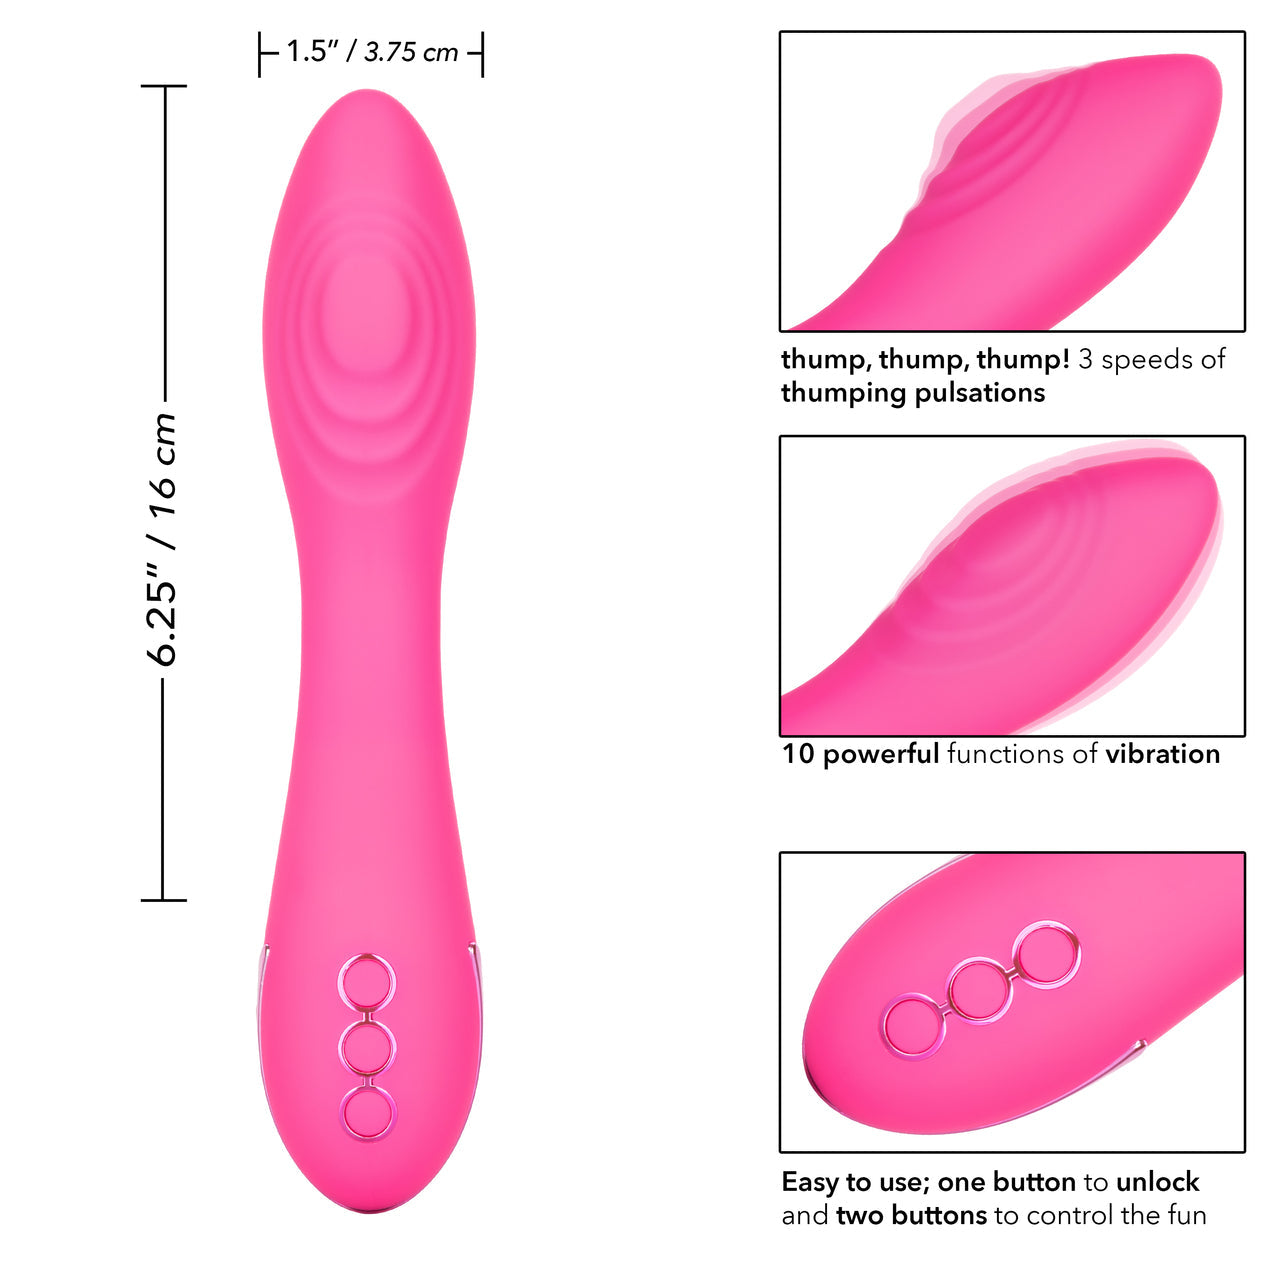 California Dreaming Surf City Centerfold Vibrator - Thorn & Feather Sex Toy Canada